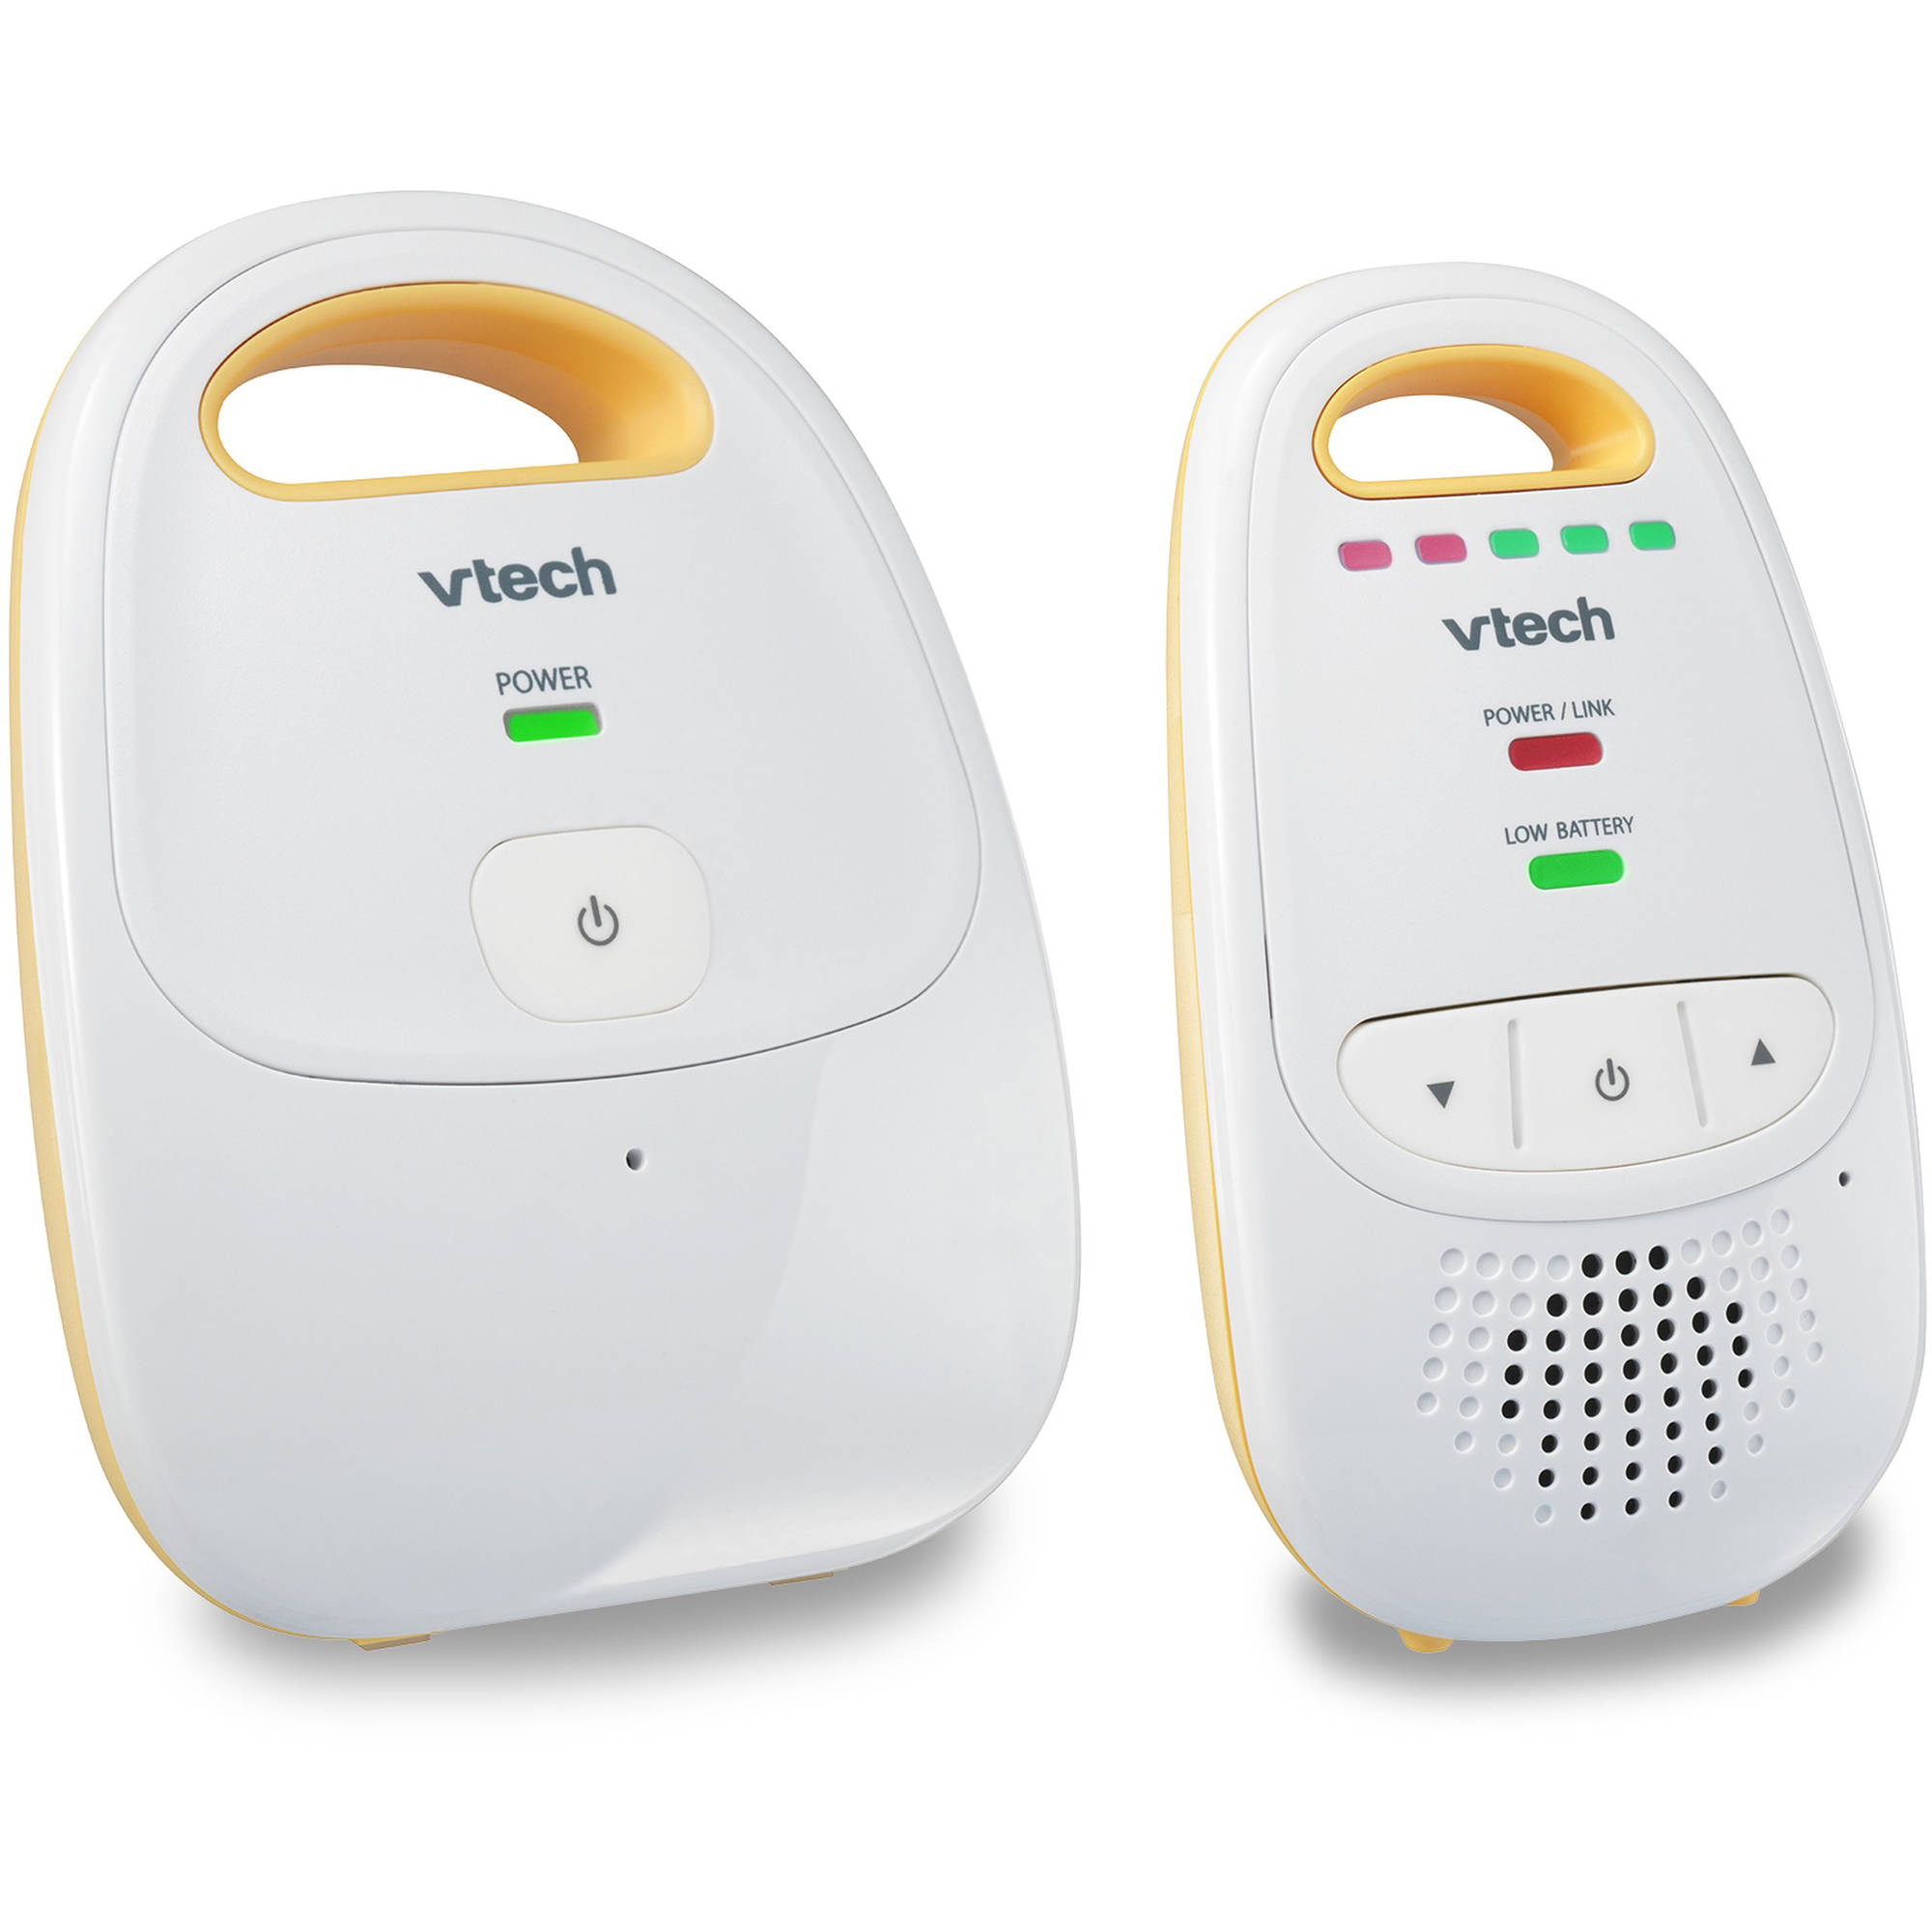 VTech Upgraded Audio Baby Monitor with Rechargeable Battery, Long Range, and Crystal-Clear Sound - image 4 of 17